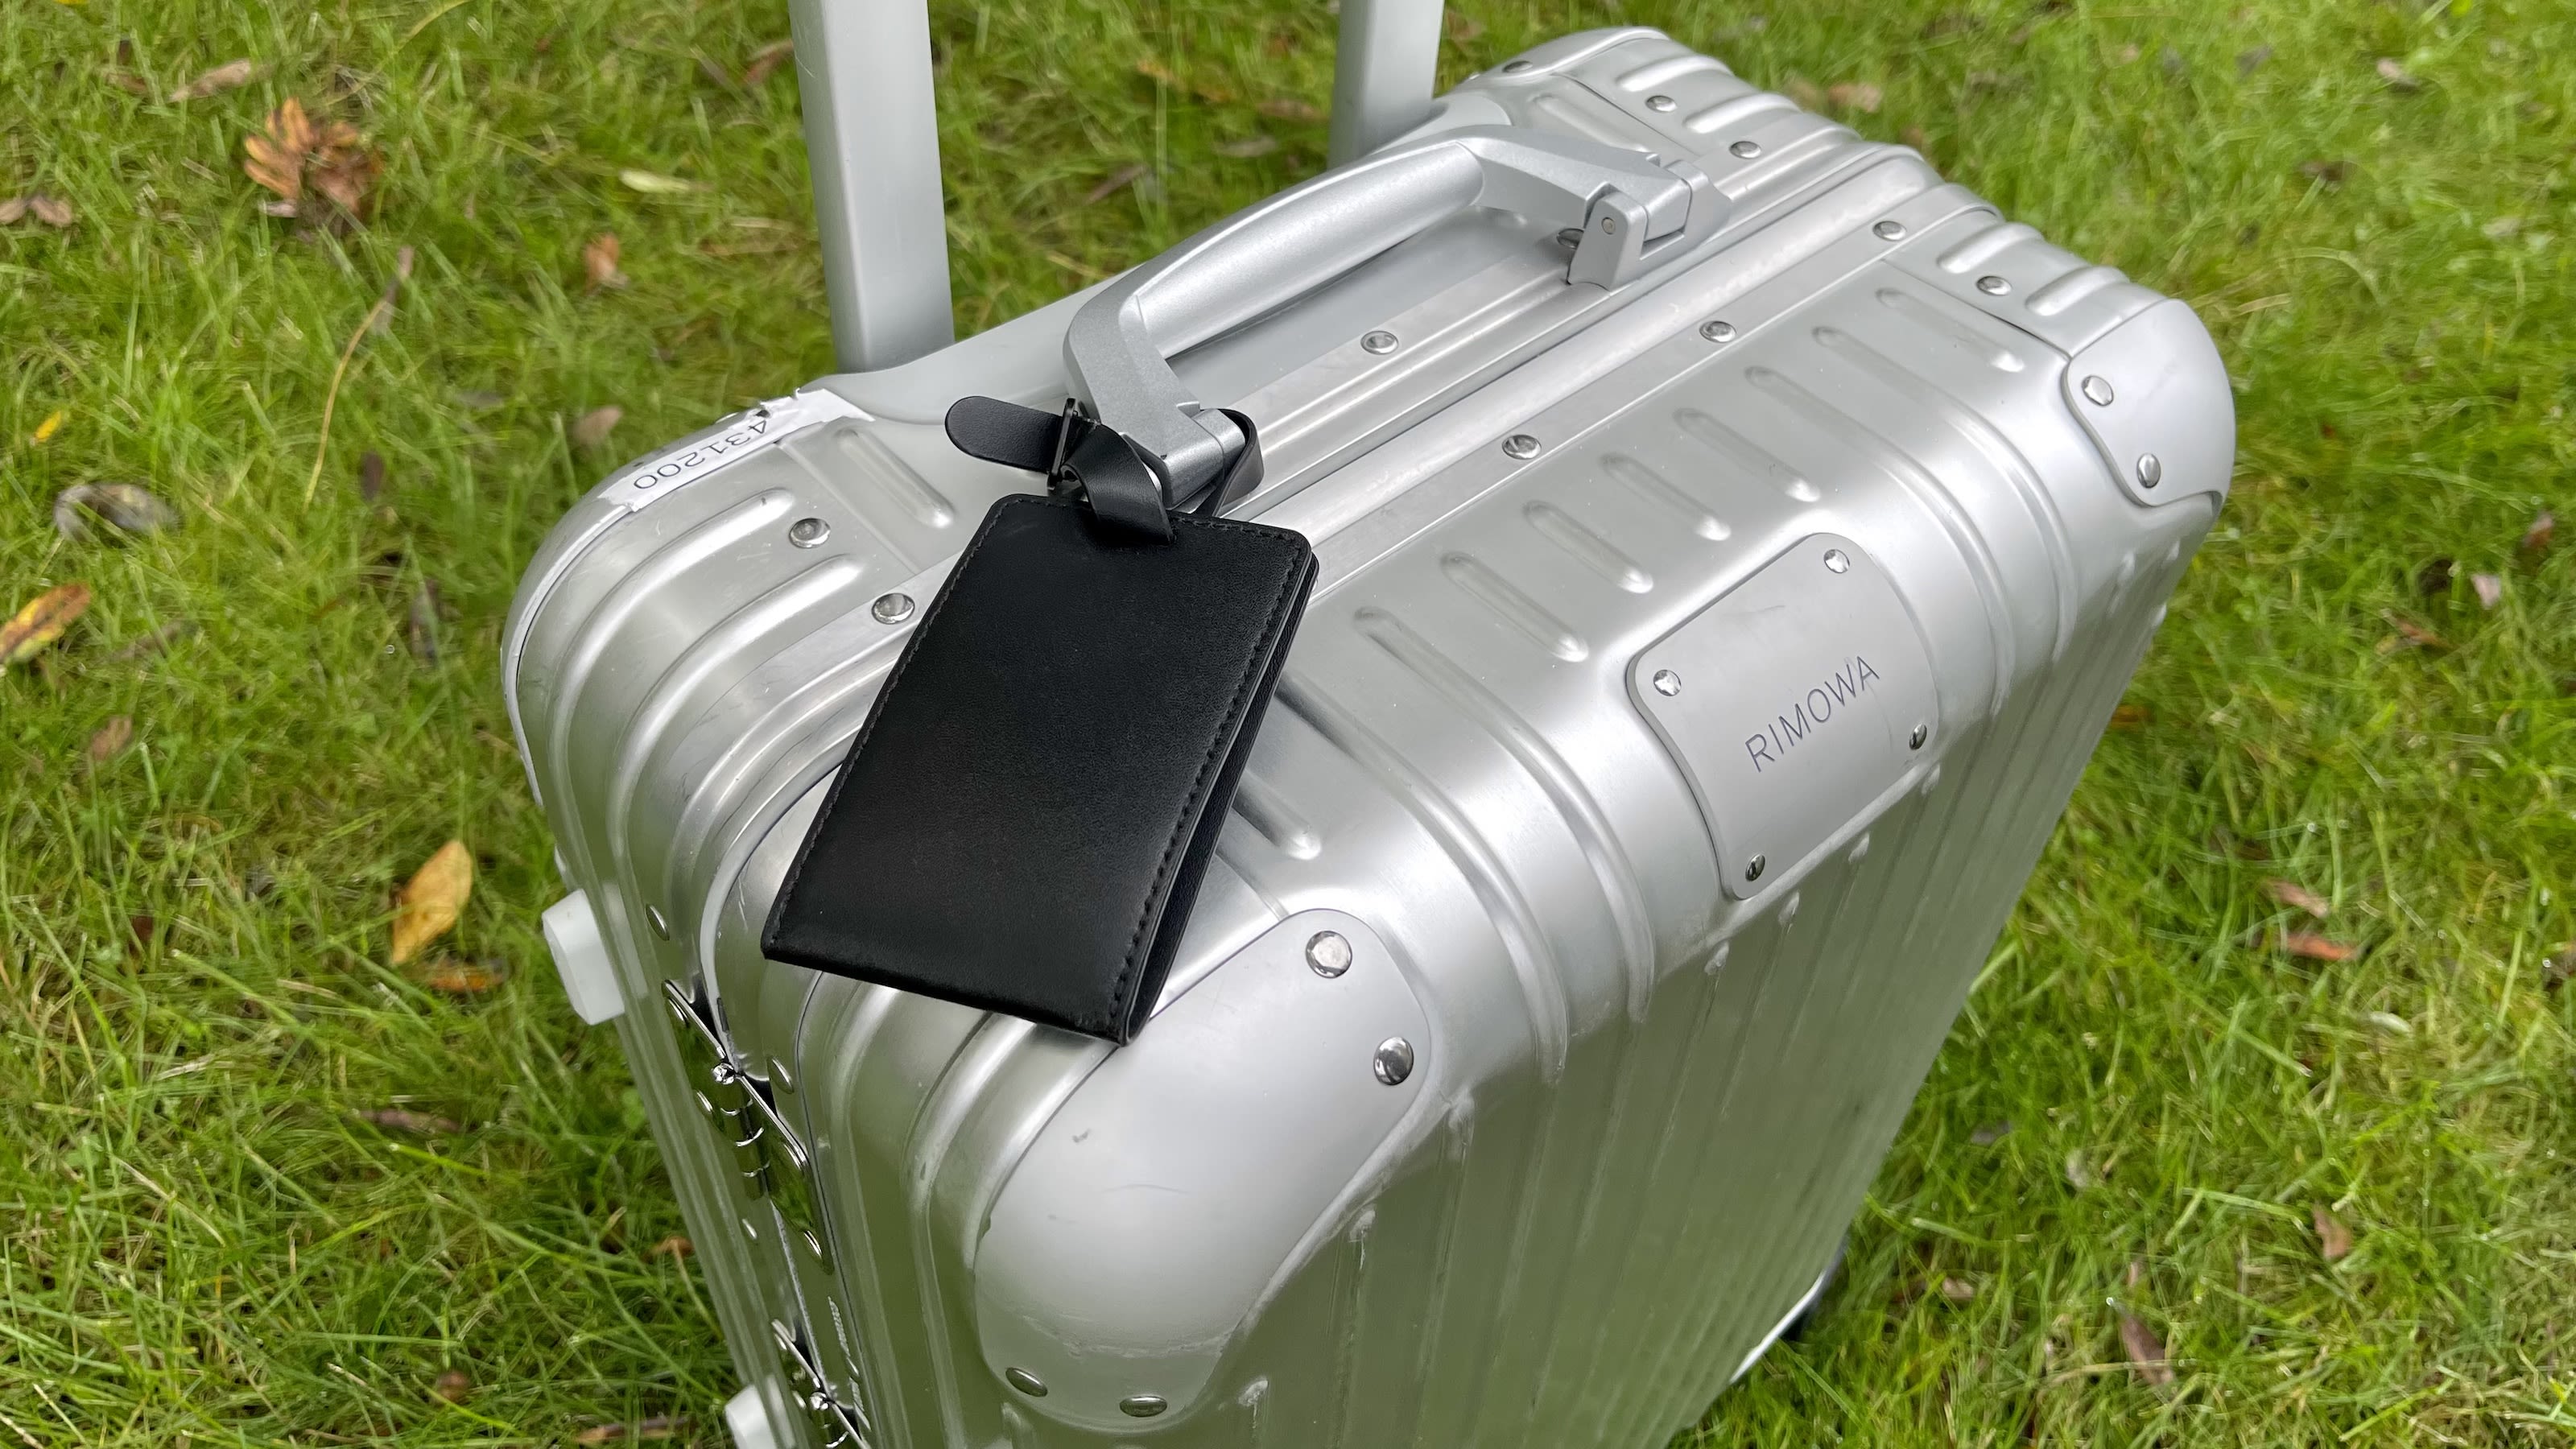 Away on X: Make your suitcase unambiguously yours with The Monogram  Edition.   / X